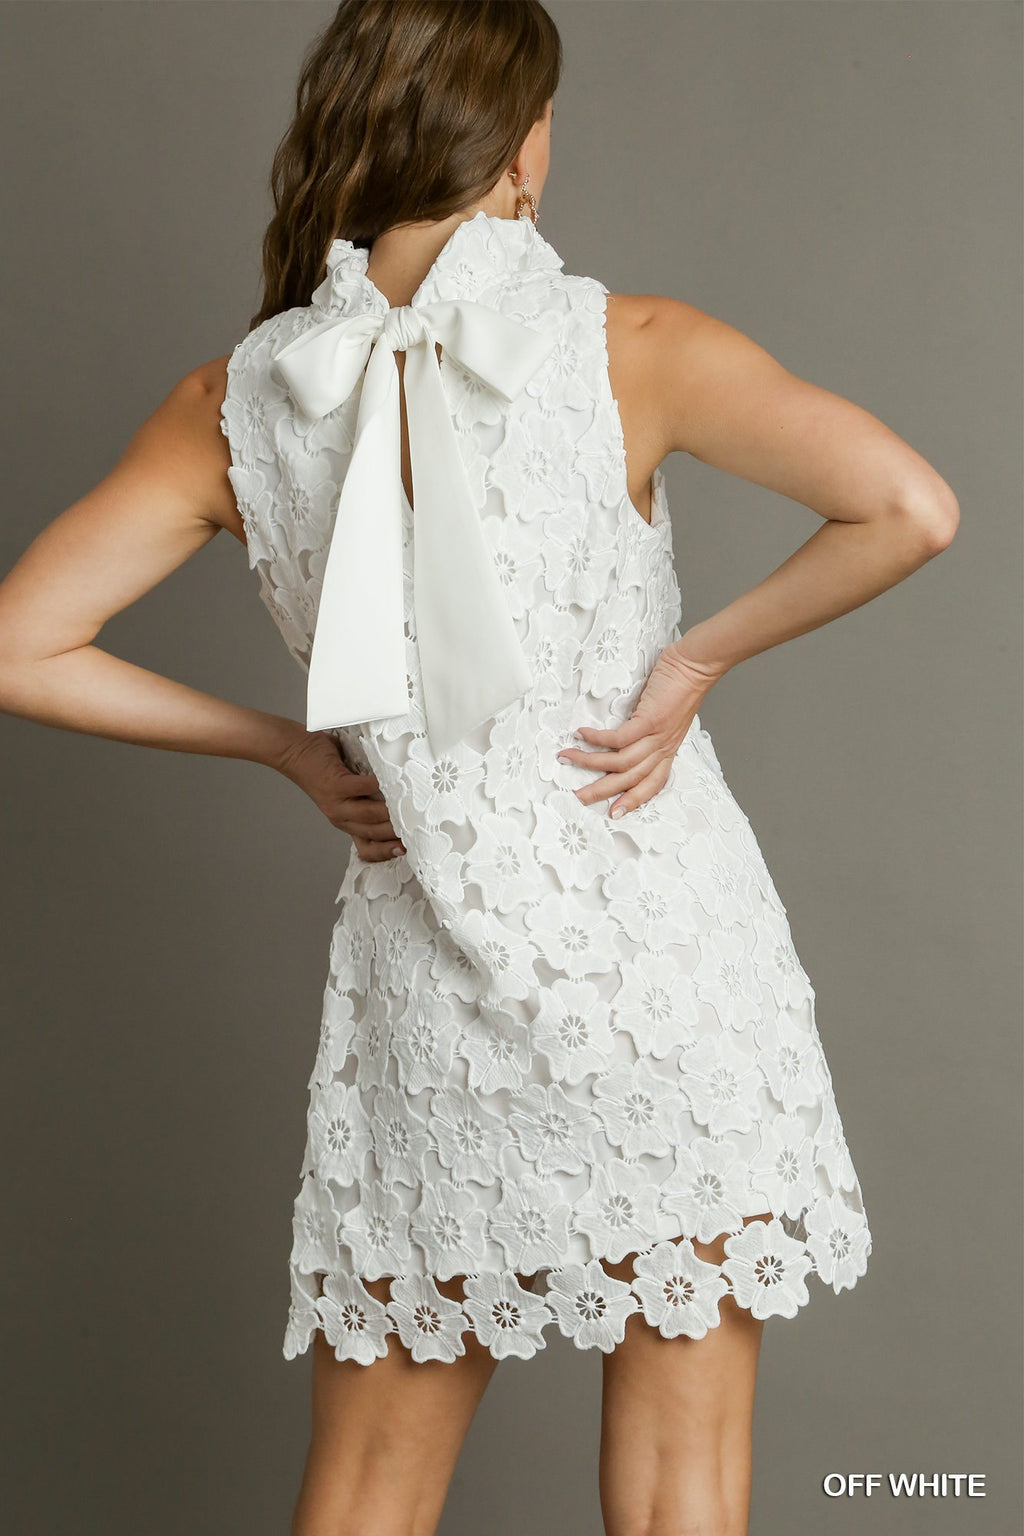 Floral Lace Sleeveless Dress